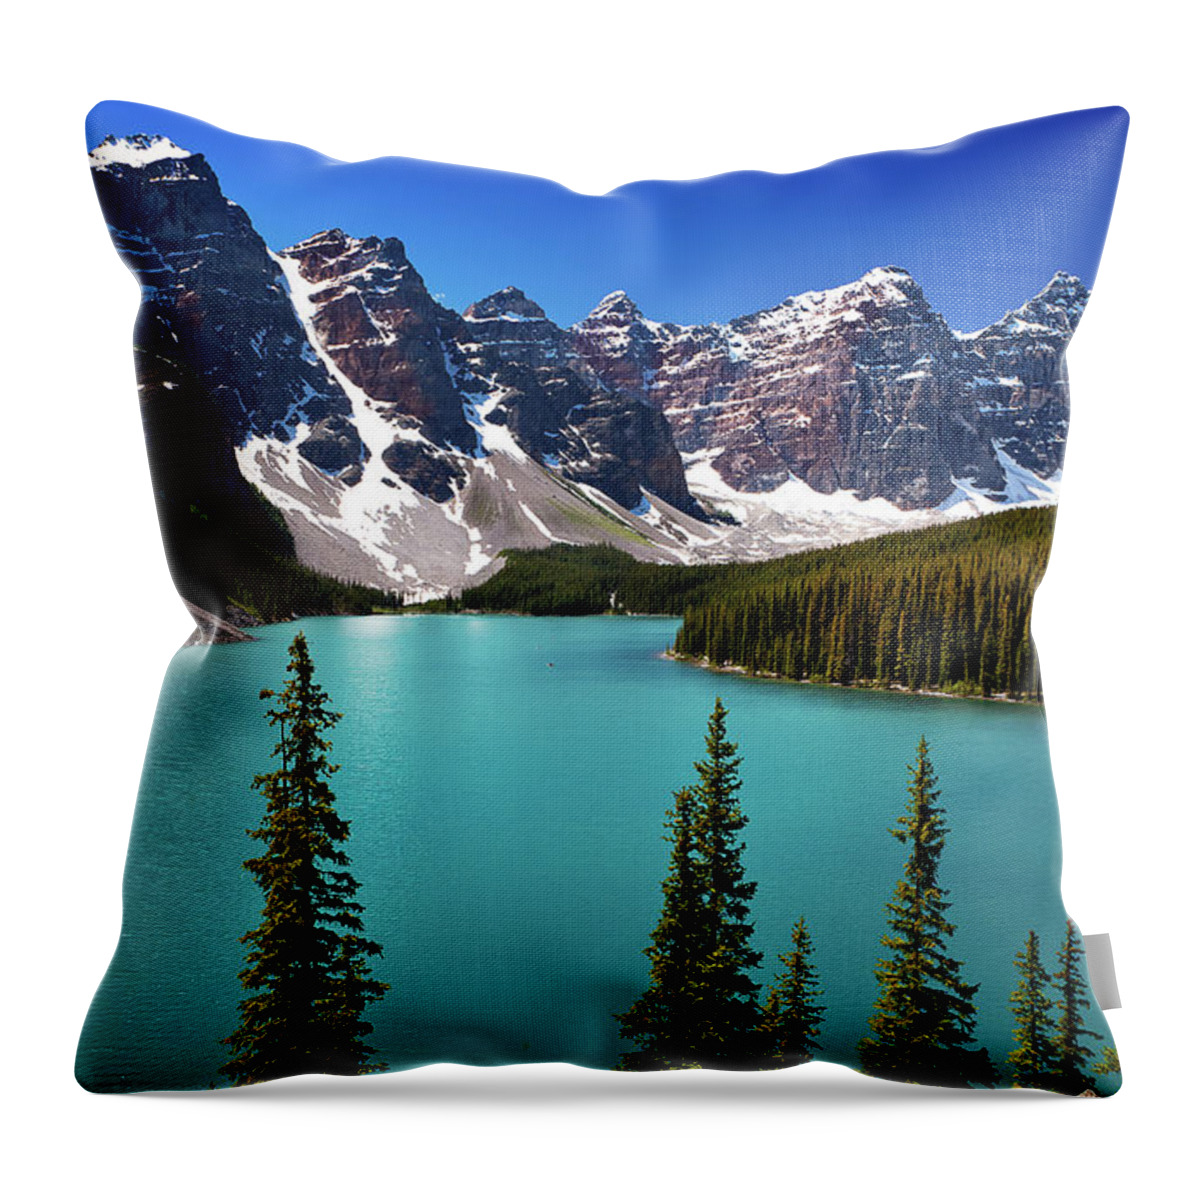 Scenics Throw Pillow featuring the photograph Moraine Lake, Banff National Park by Edwin Chang Photography